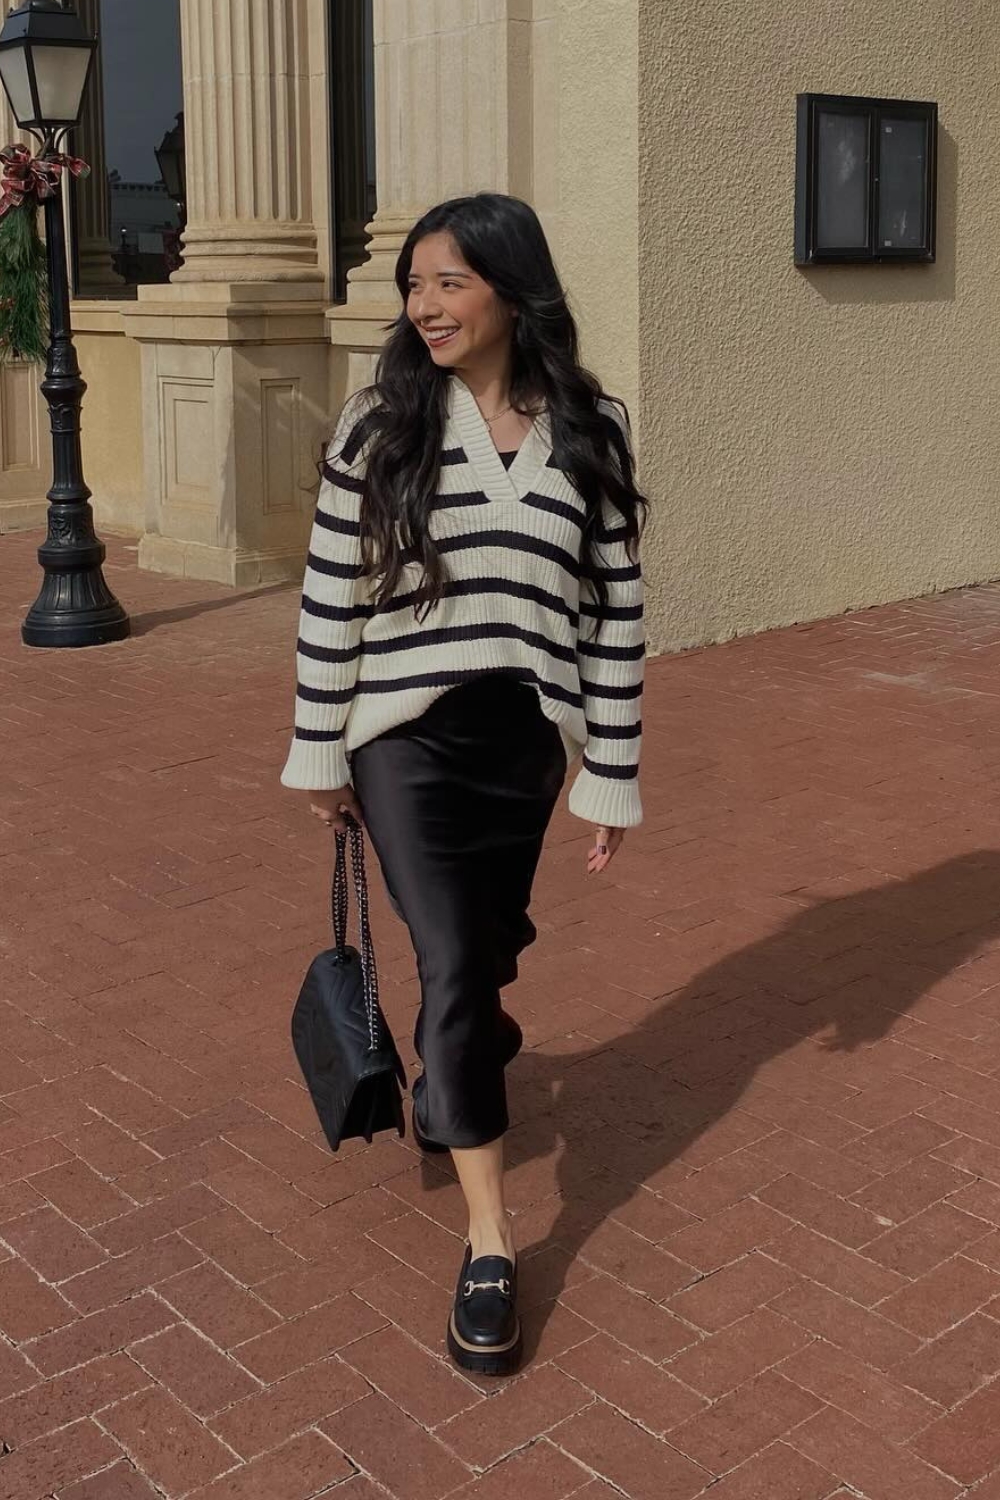 Casual Spring Outfit Ideas - Satin bias skirt with striped sweater